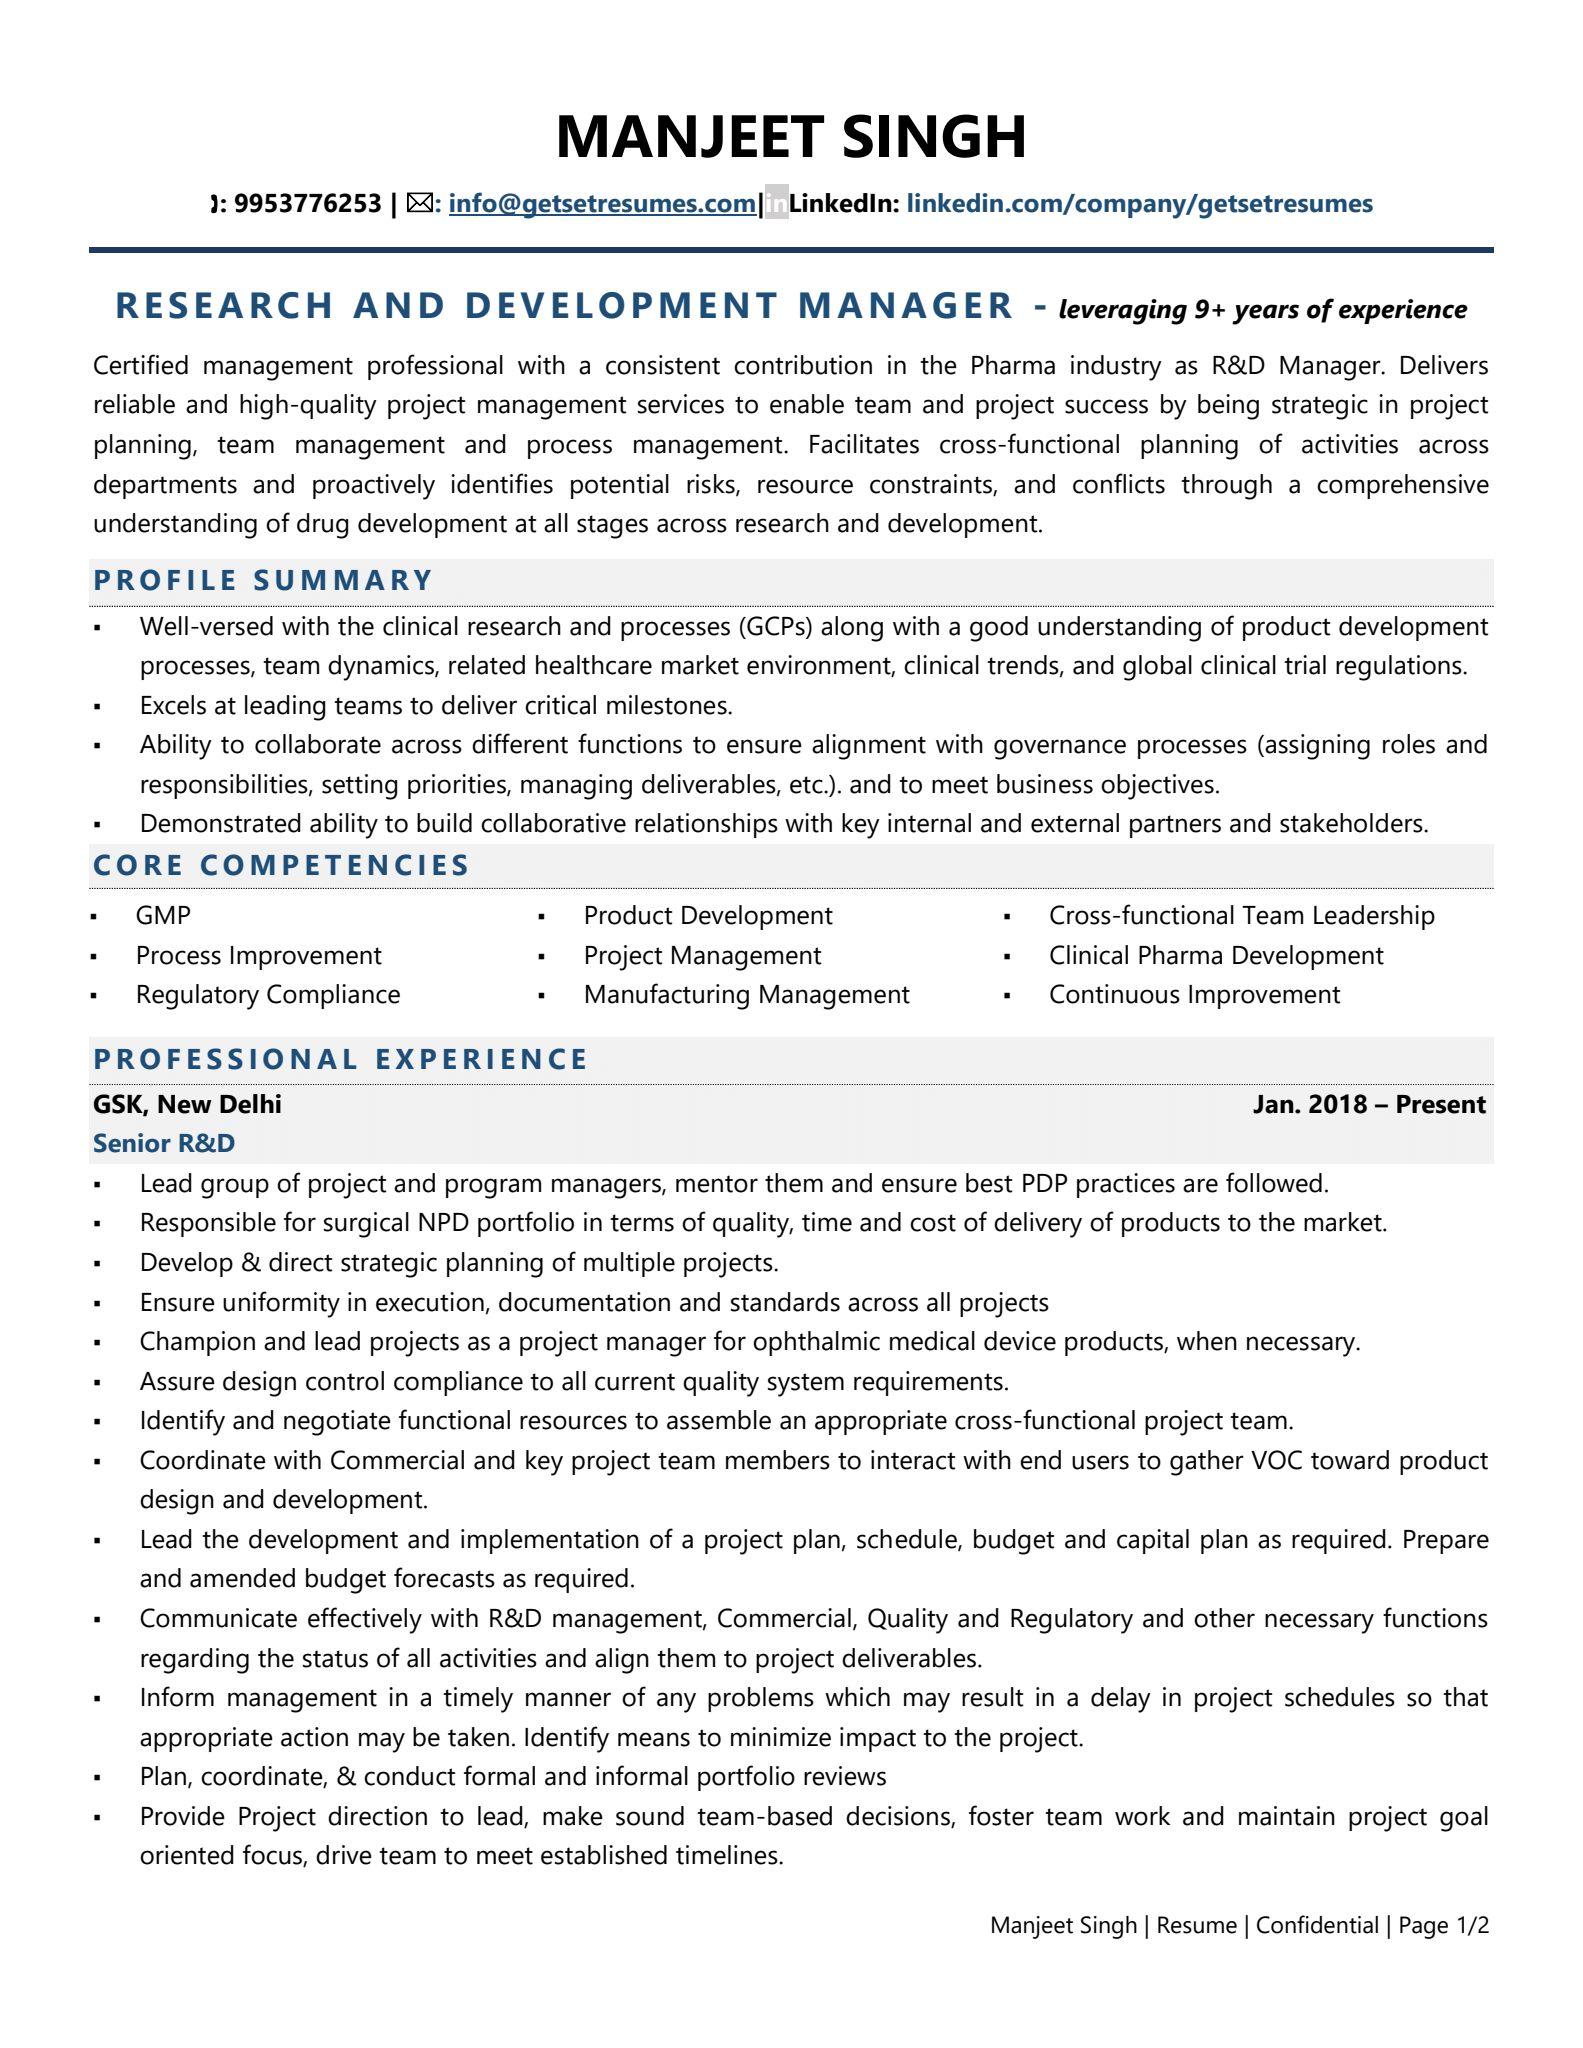 Research and Development Manager (Pharma) - Resume Example & Template